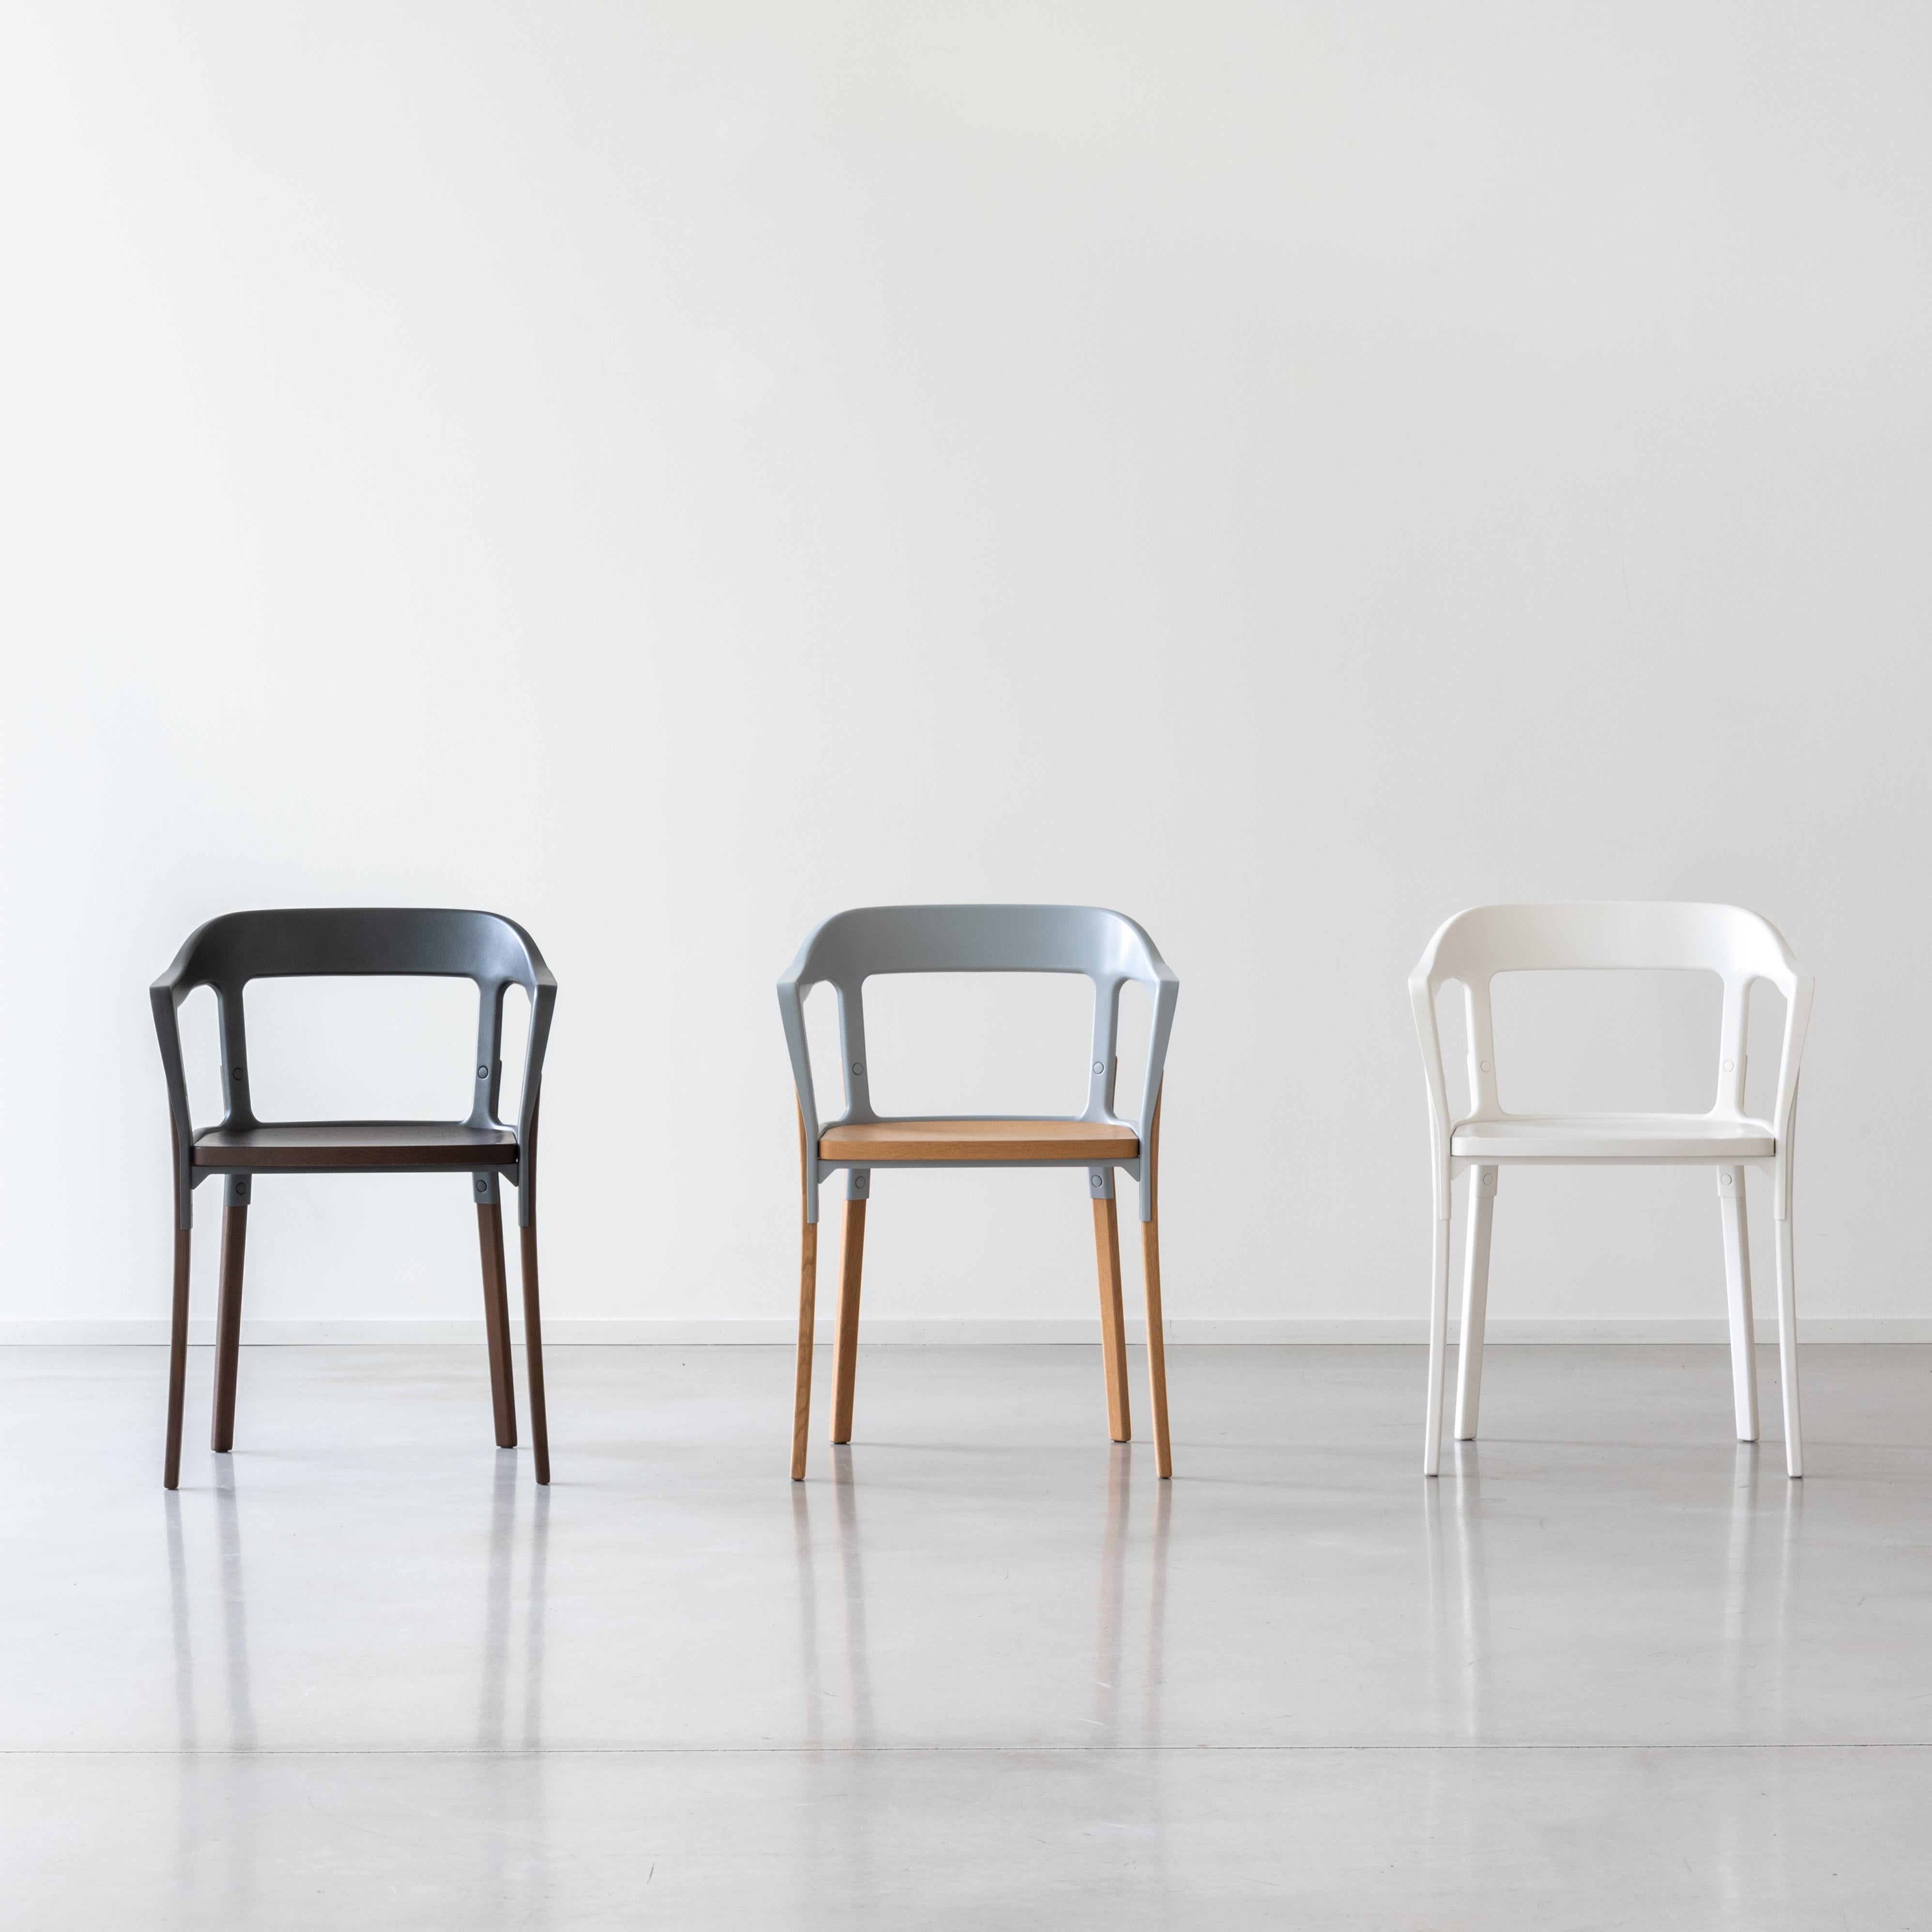 Contemporary Steelwood Chair in Natural/White by Ronan & Erwan Boroullec for MAGIS For Sale